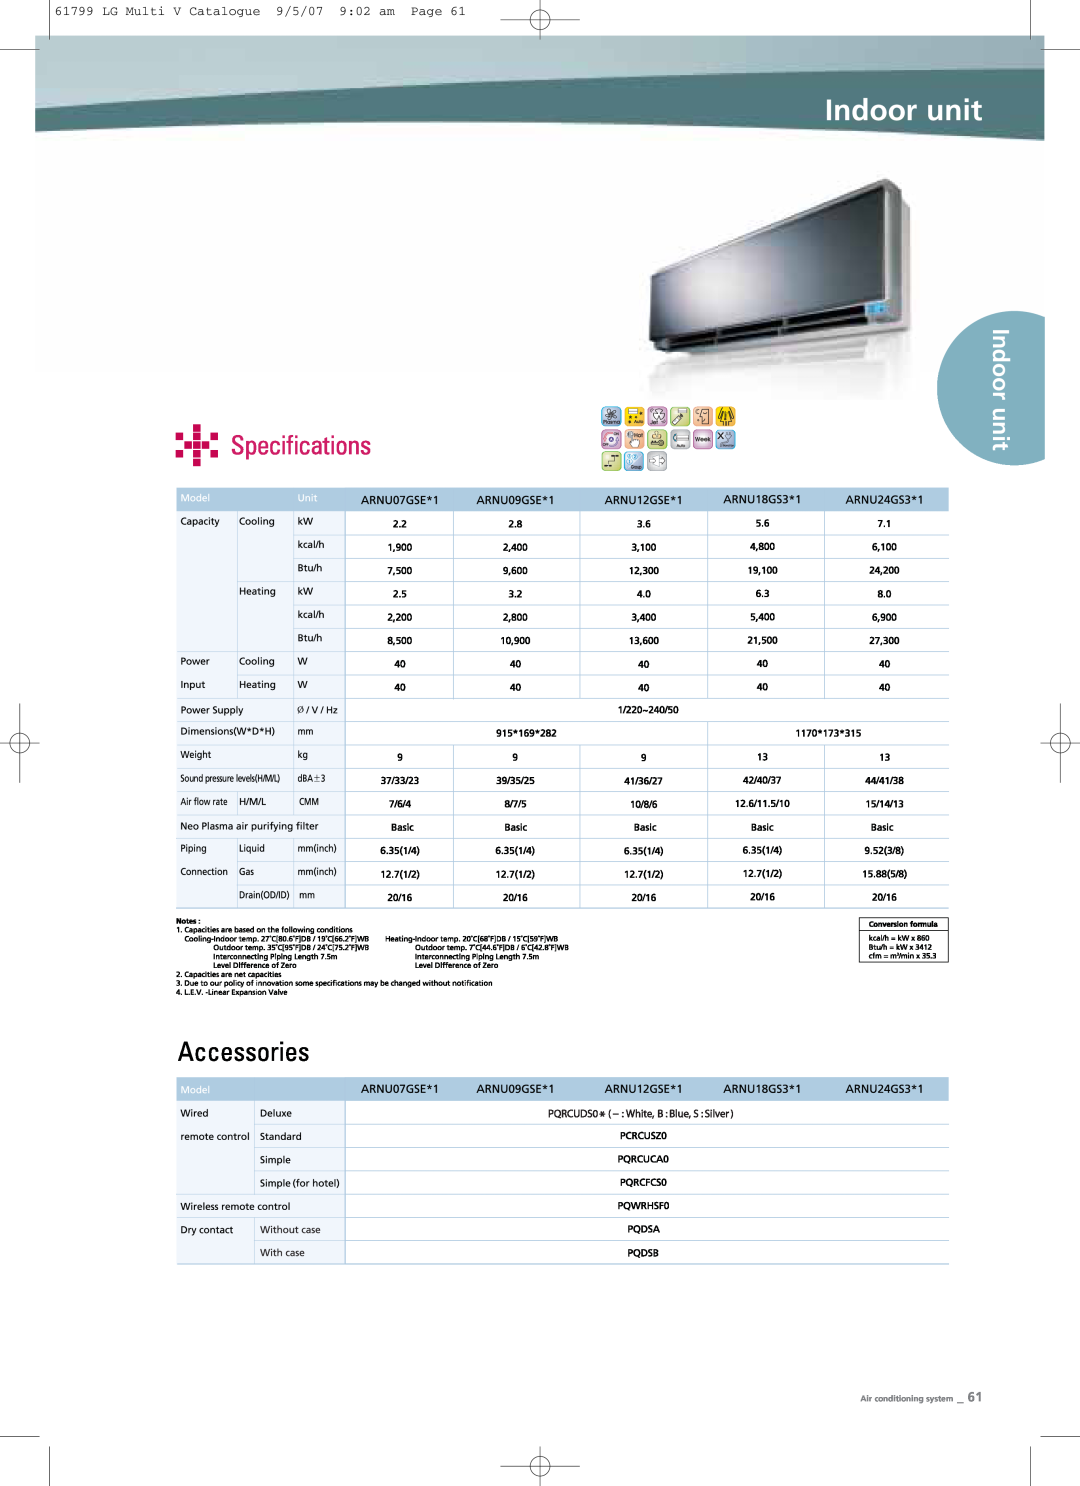 LG Electronics PRHR040 manual Indoor unit, Specifications, LG Multi V Catalogue 9/5/07 902 am Page, Air conditioning system 